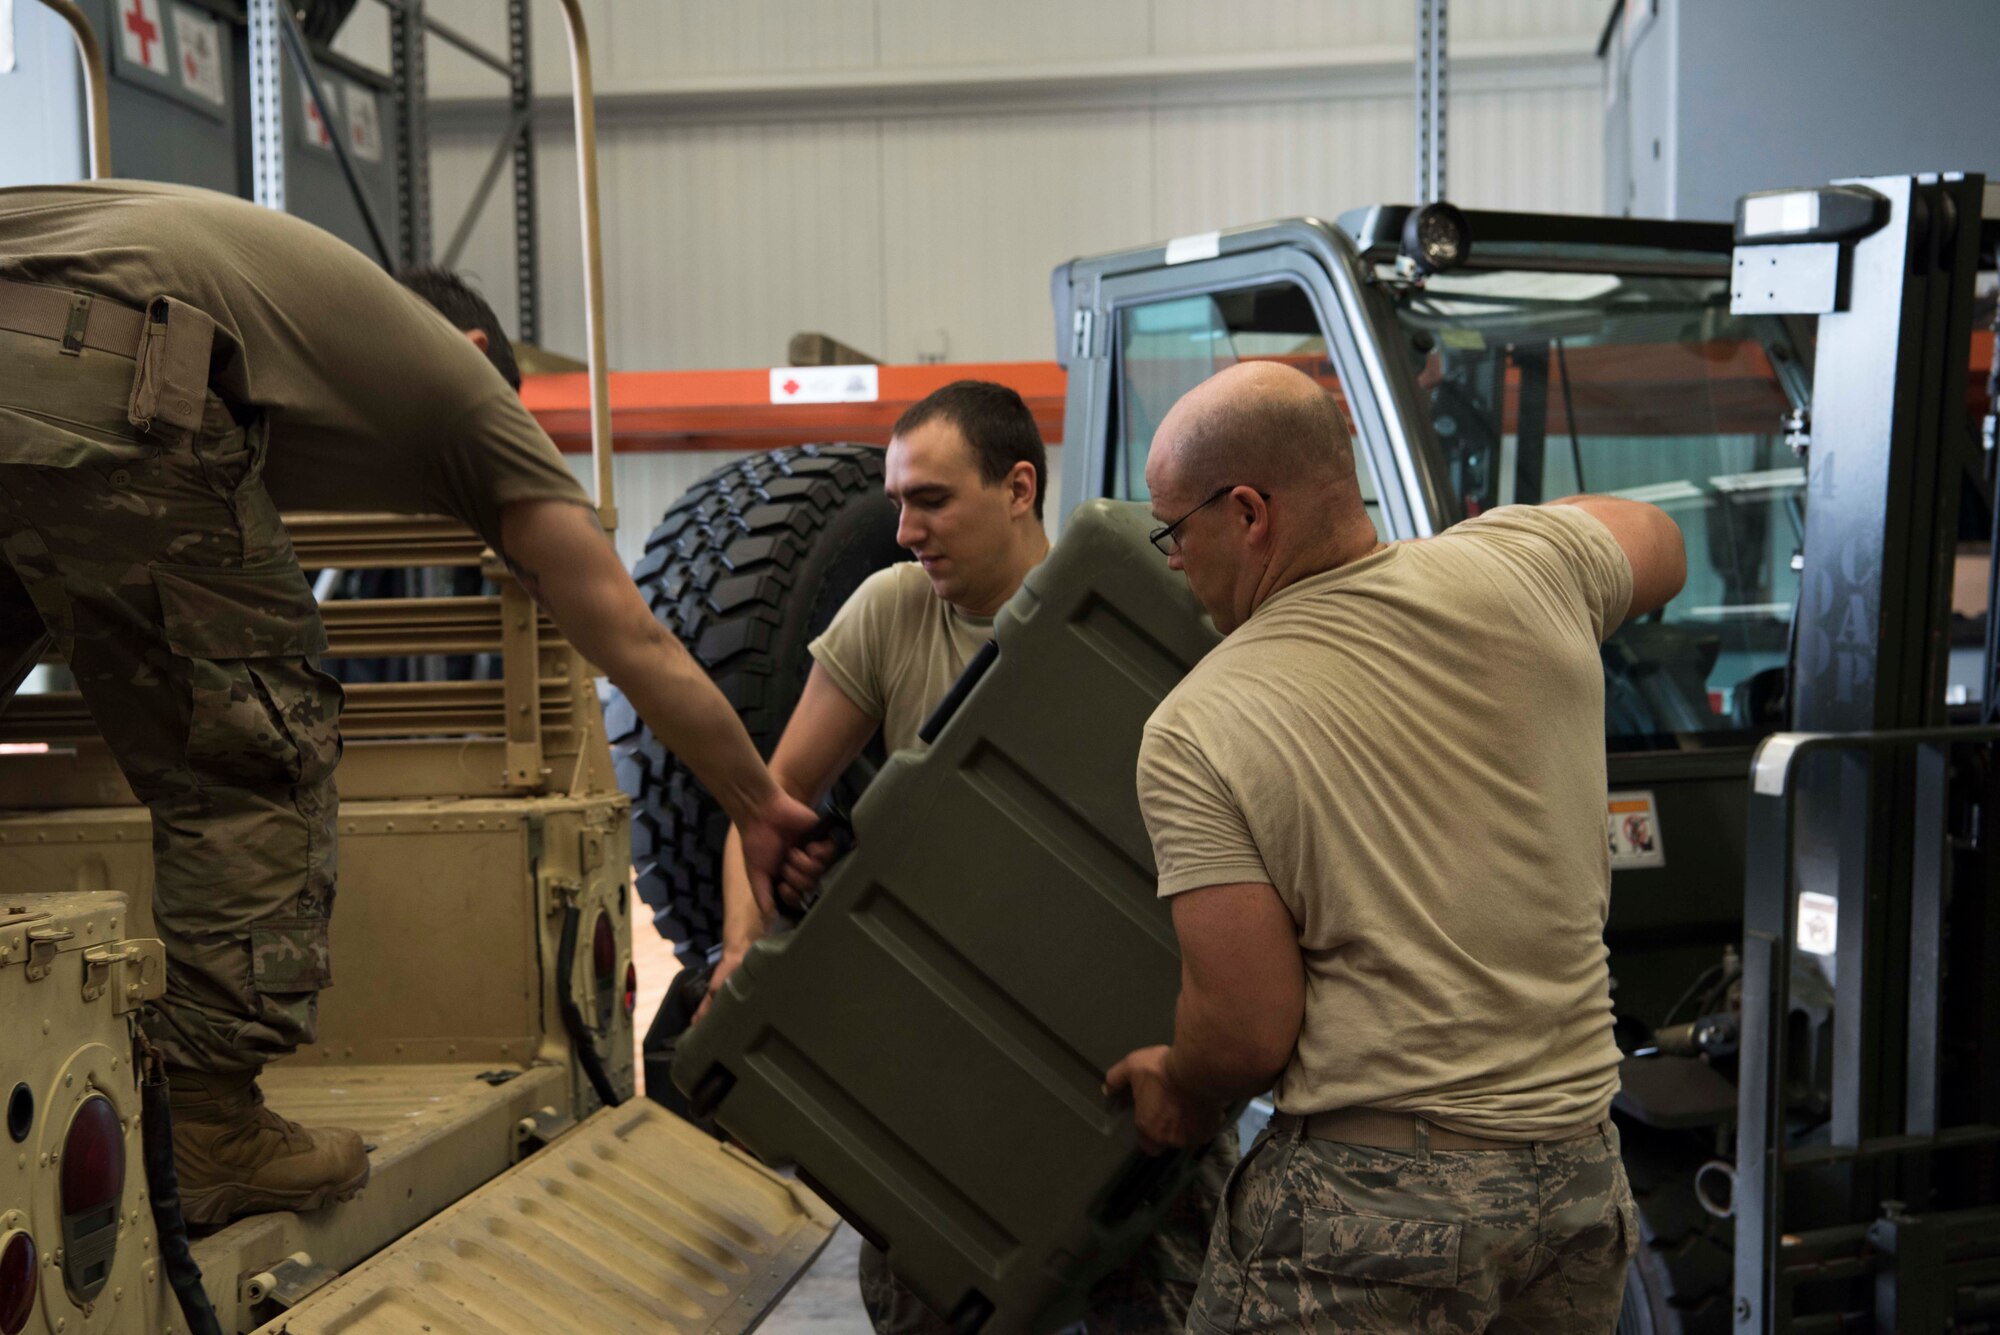 U.S. Air Force Airman 1st Class Benjamin Lippold, a biomedical equipment technician, and Master Sgt. Ursus Vargas, a medical material section chief, both with the 6th Medical Support Squadron (MDSS), load cargo into a Humvee at MacDill Air Force Base, Fla., Sept. 4, 2019. The 6th MDSS was tasked by Air Mobility Command’s chief of Readiness to prepare equipment for use in hurricane relief. (U.S. Air Force Photo by Senior Airman Frank Rohrig)